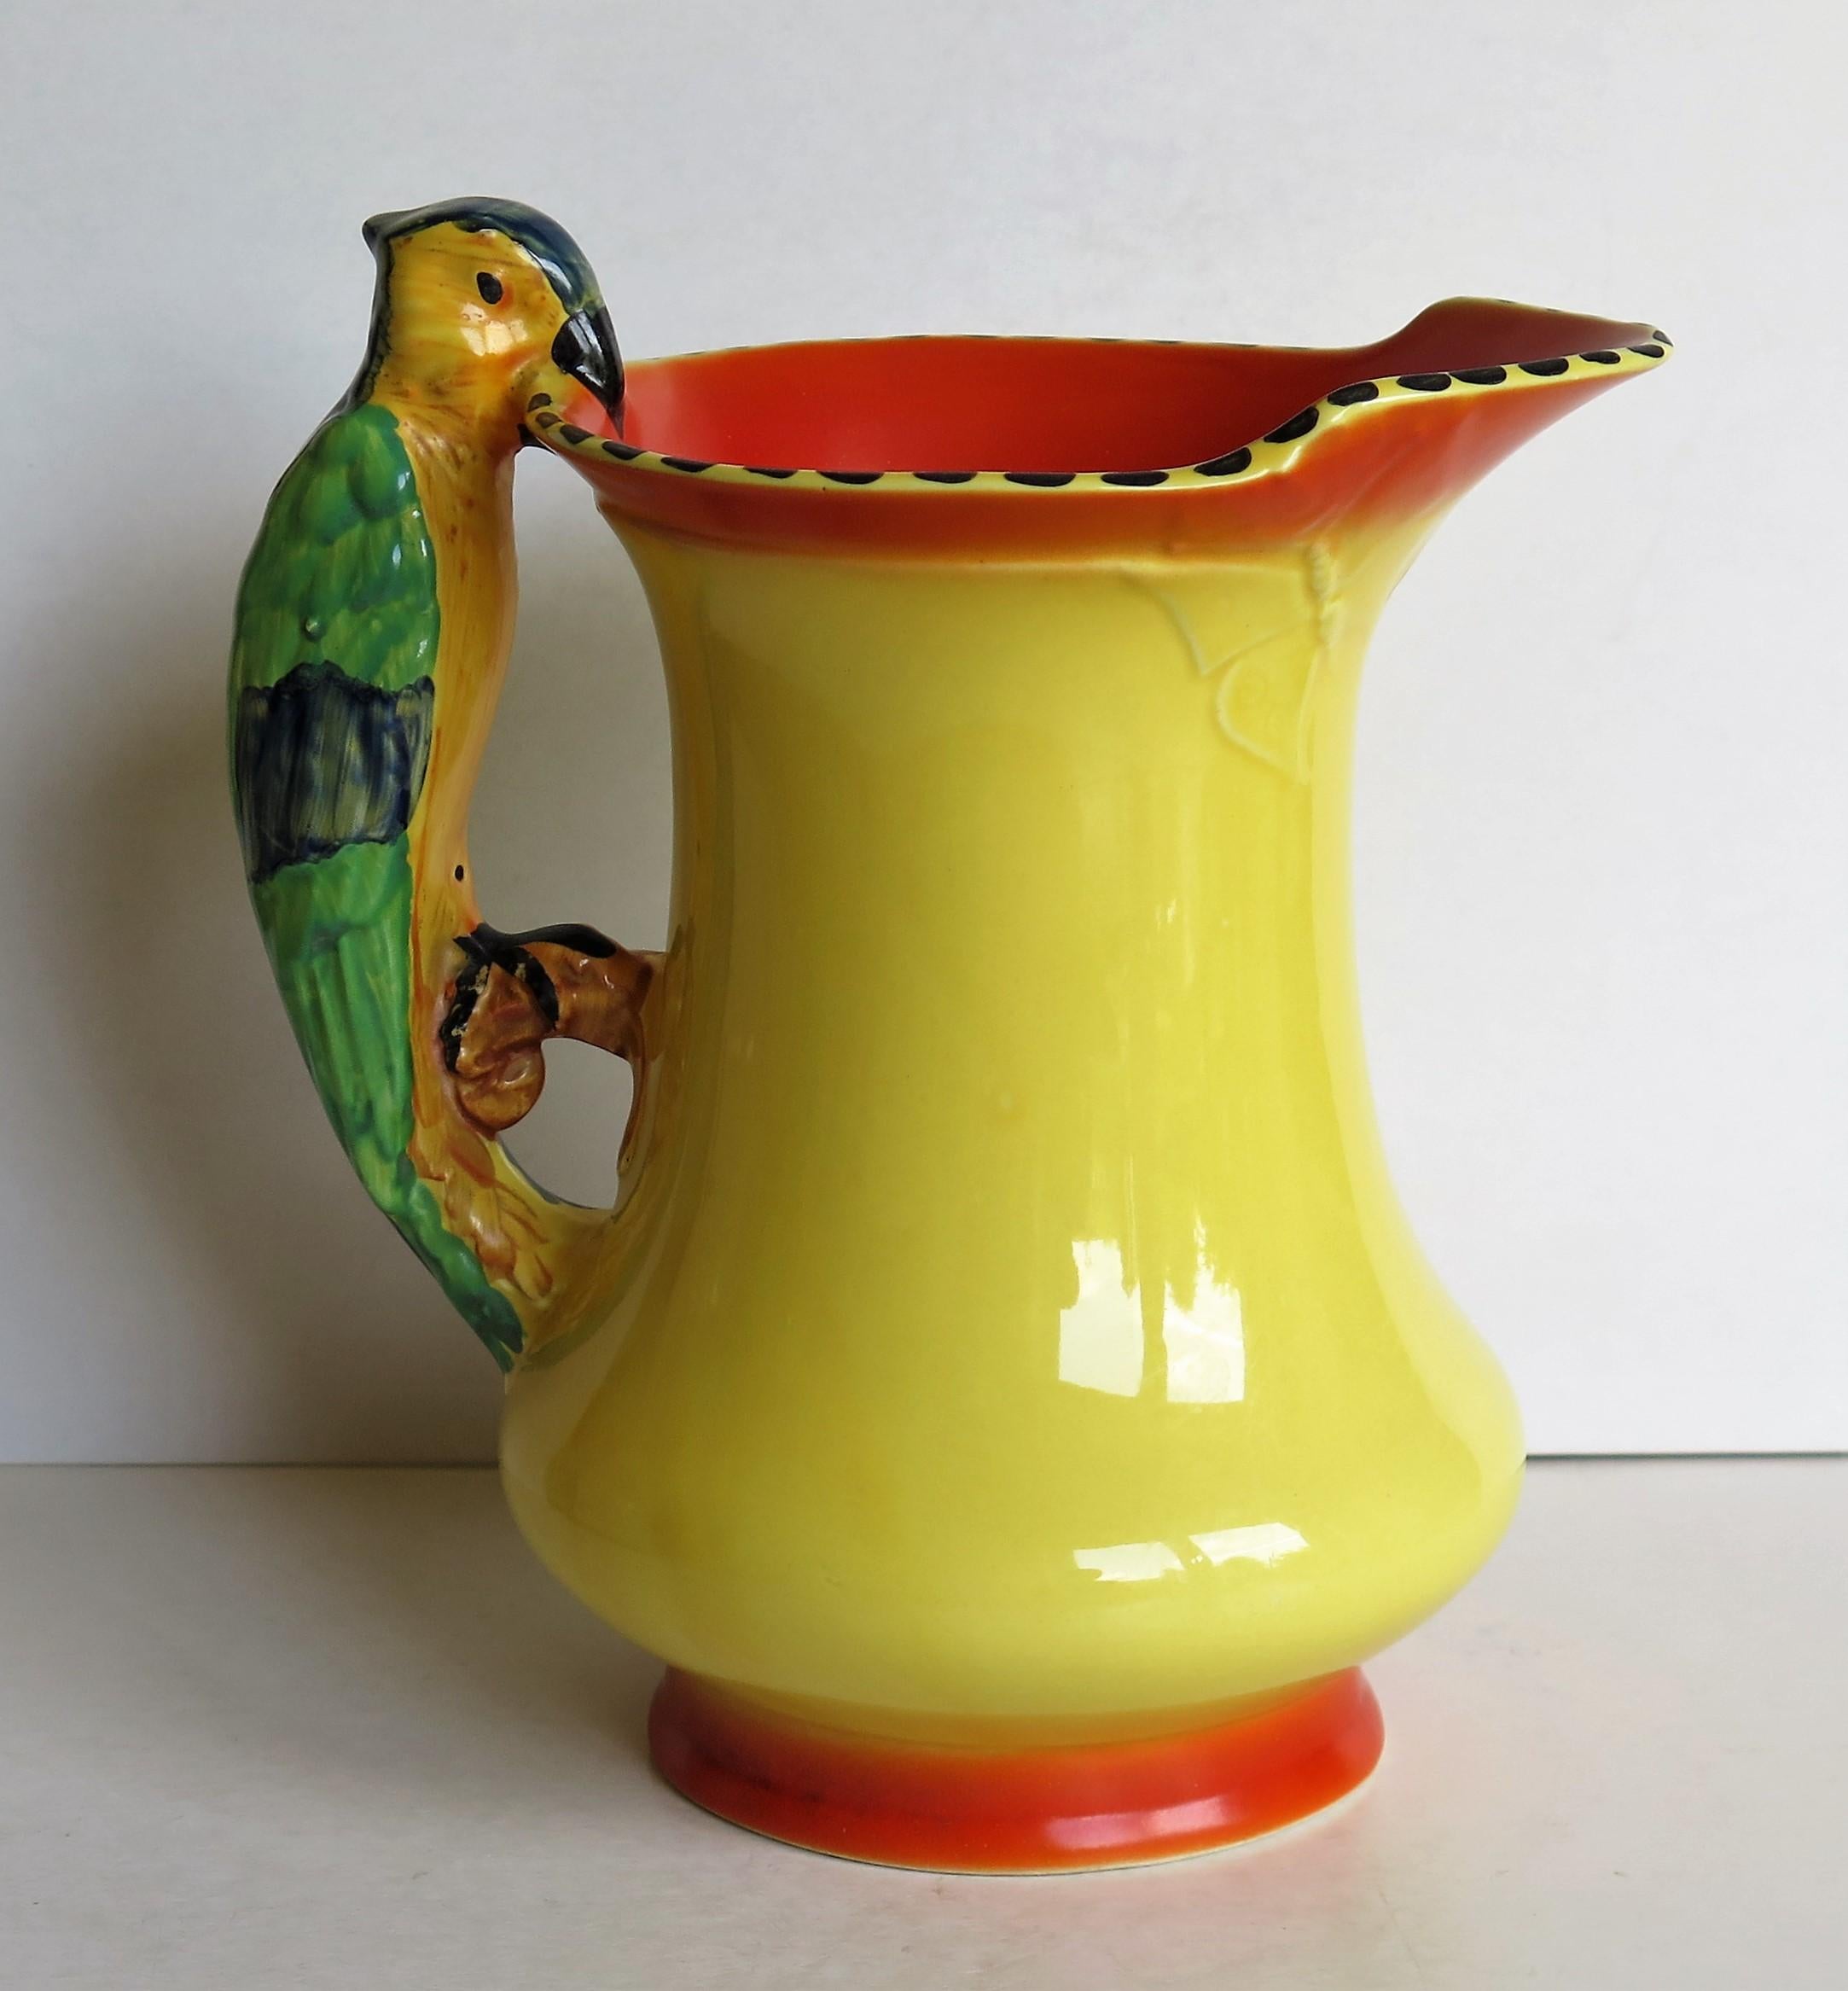 English Art Deco Burleigh Ware Pottery Jug or Pitcher Parrot Handle Hand-Painted, 1930s